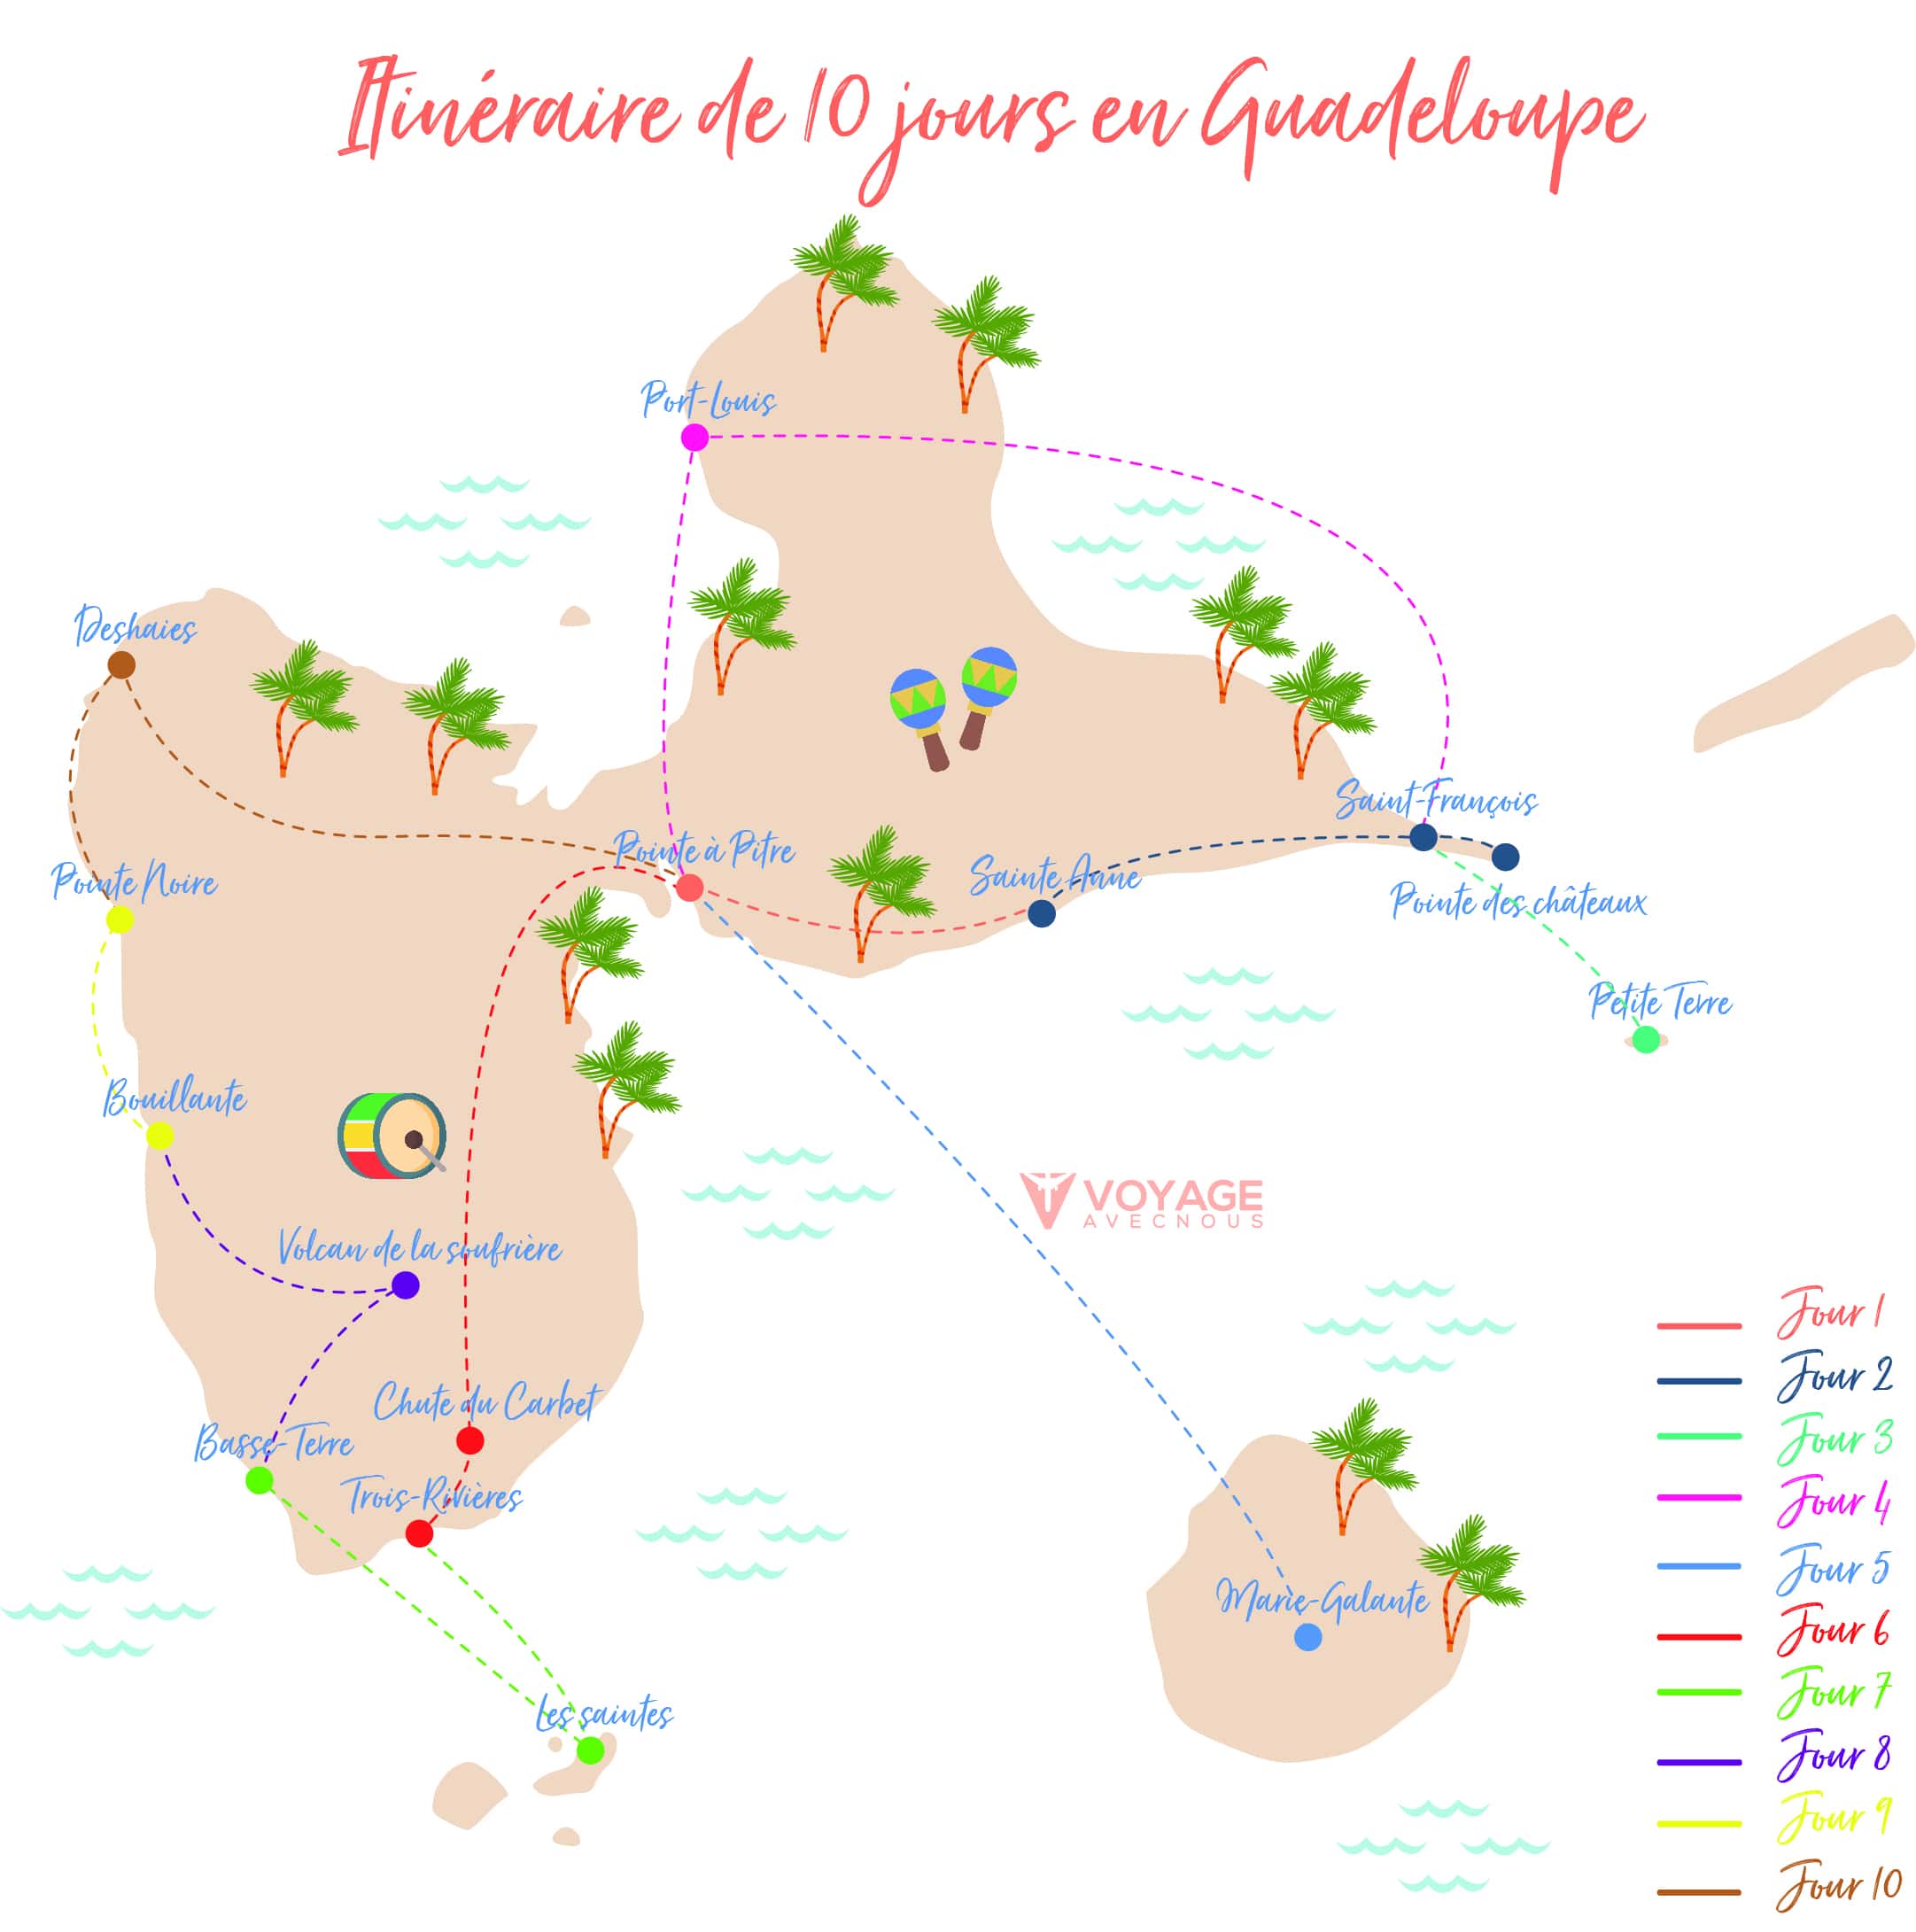 itineraire guadeloupe 10 jours